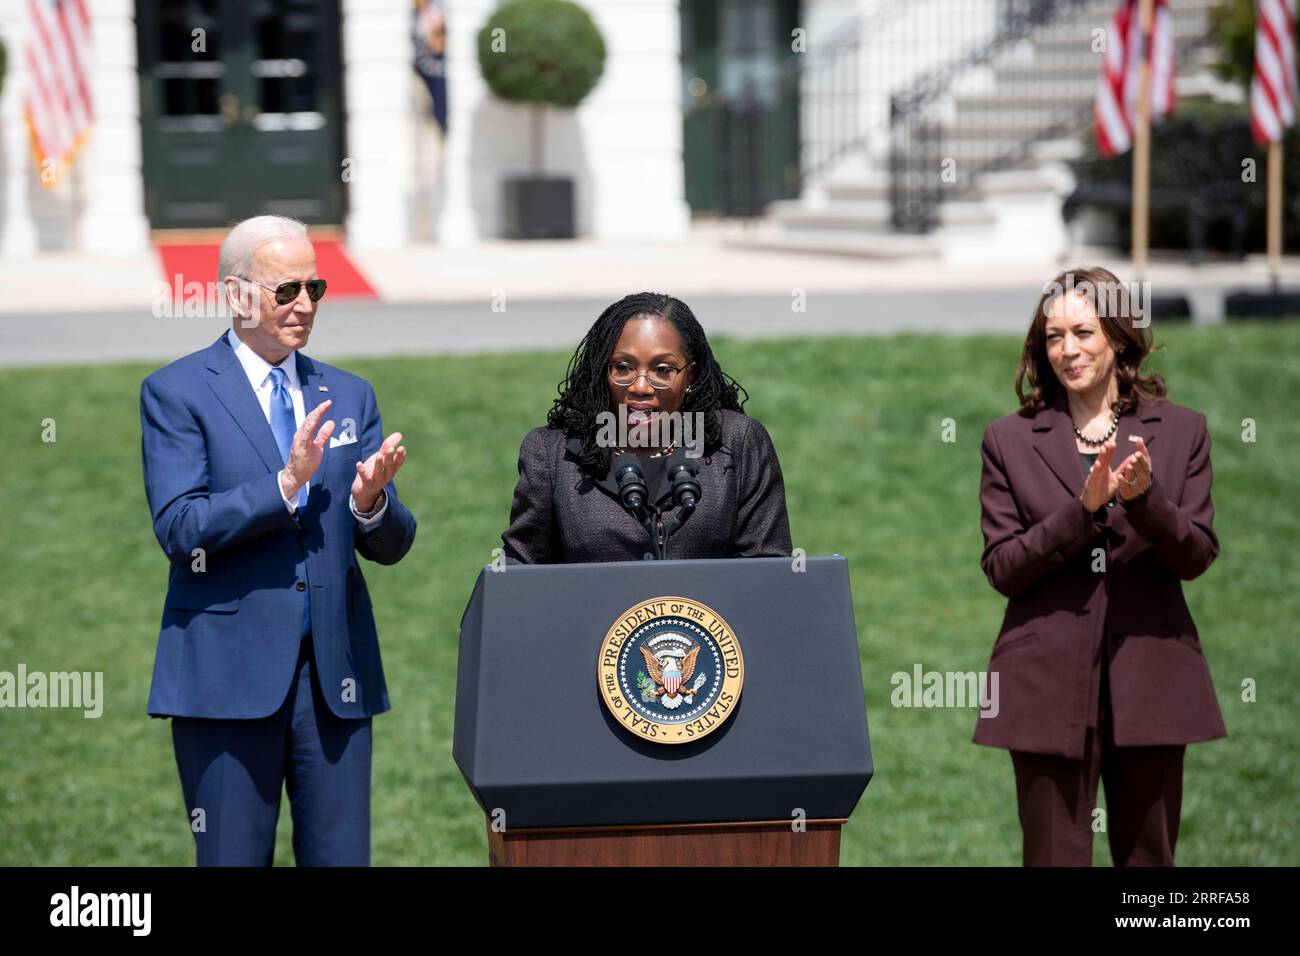 220408 -- WASHINGTON, April 8, 2022 -- Judge Ketanji Brown Jackson C, U.S. President Joe Biden L and Vice President Kamala Harris attend an event marking the Senate confirmation of Jackson for the Supreme Court at the South Lawn of the White House in Washington, D.C., the United States, on April 8, 2022. The White House held the event Friday afternoon to mark the Senate confirmation of the first African American woman for the Supreme Court.  U.S.-WASHINGTON, D.C.-WHITE HOUSE-JUDGE KETANJI BROWN JACKSON-SUPREME COURT-CONFIRMATION LiuxJie PUBLICATIONxNOTxINxCHN Stock Photo